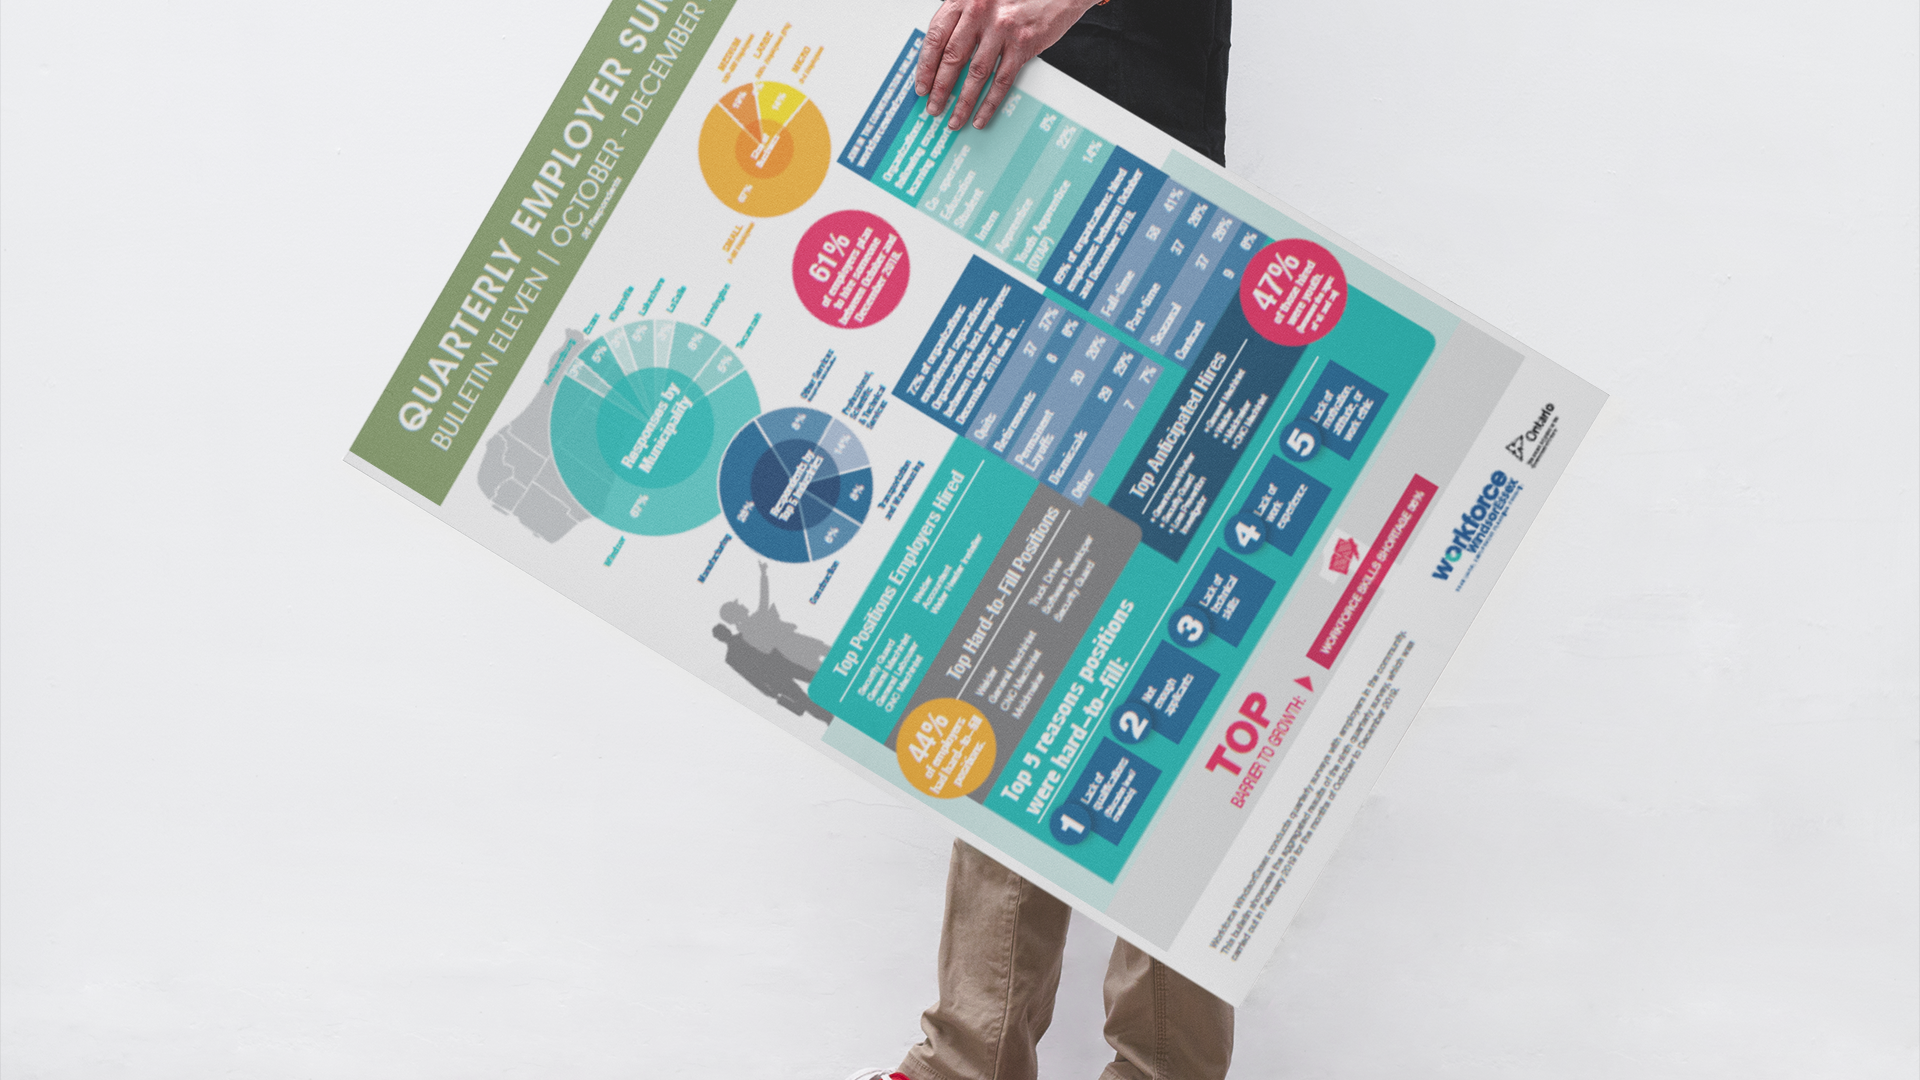 Person holding poster of the quarterly employer survey